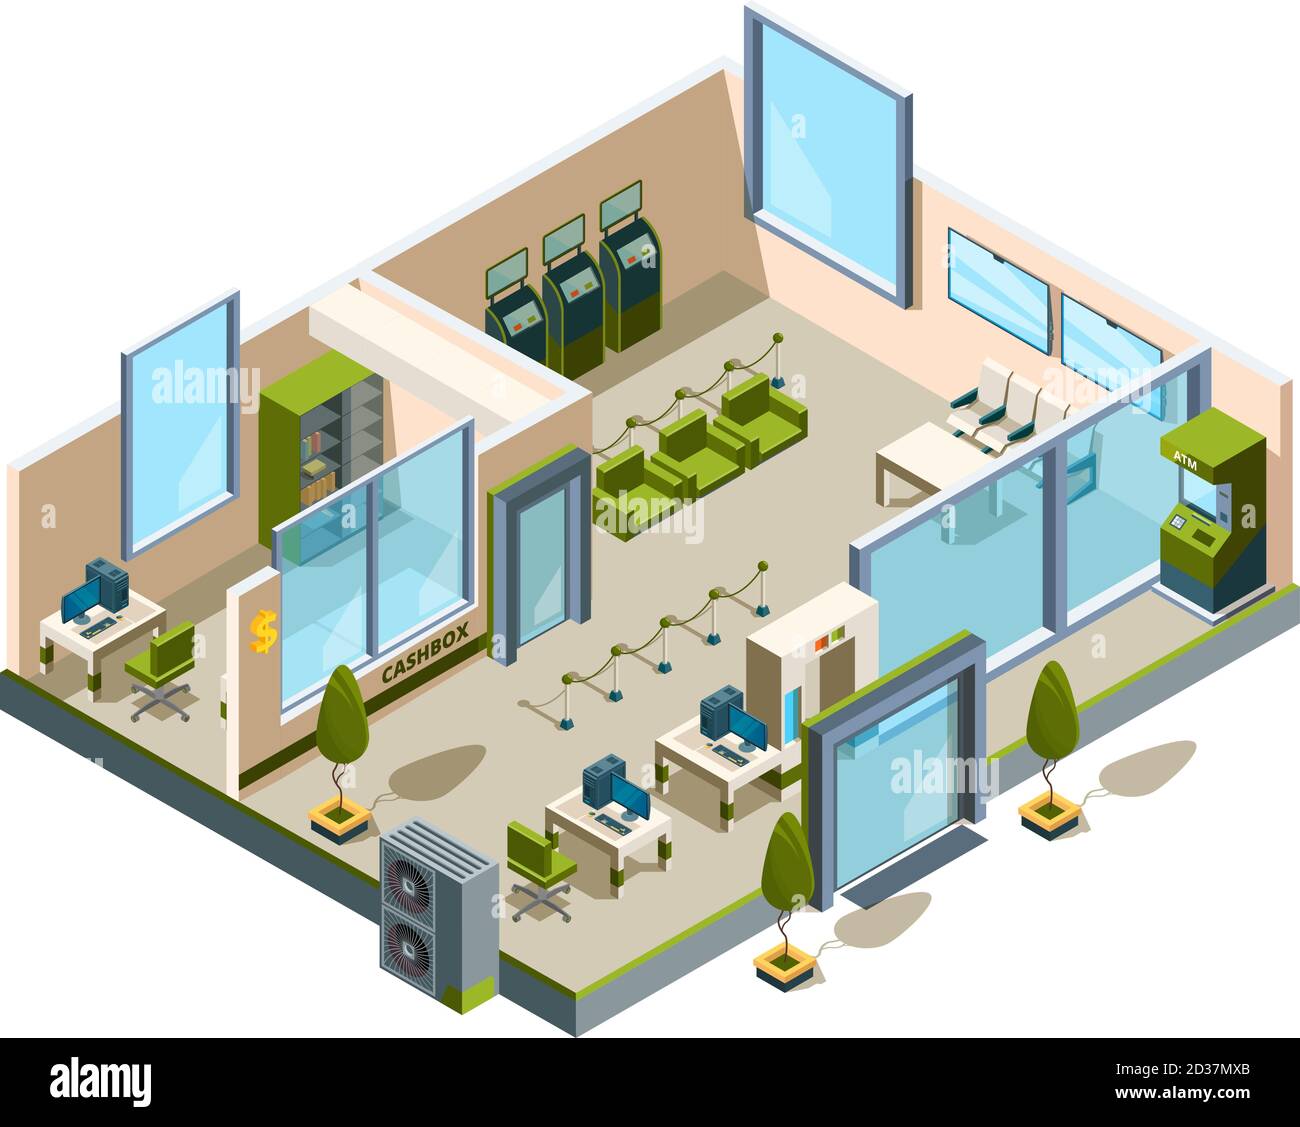 Bank isometric. Modern building interior office open space banking lobby service room for managers vector 3d low poly Stock Vector